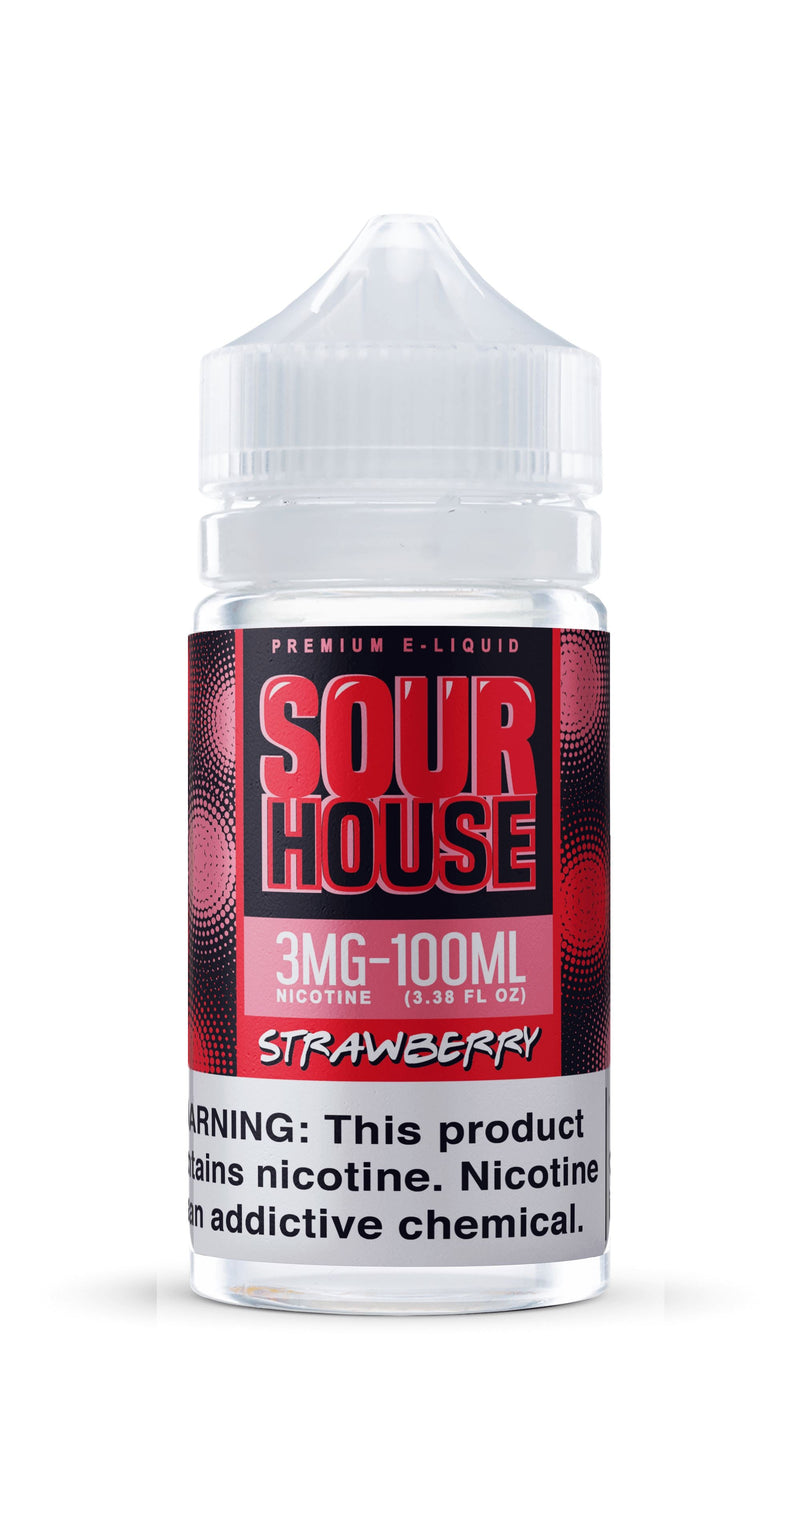 Strawberry by Sour House 100ml bottle